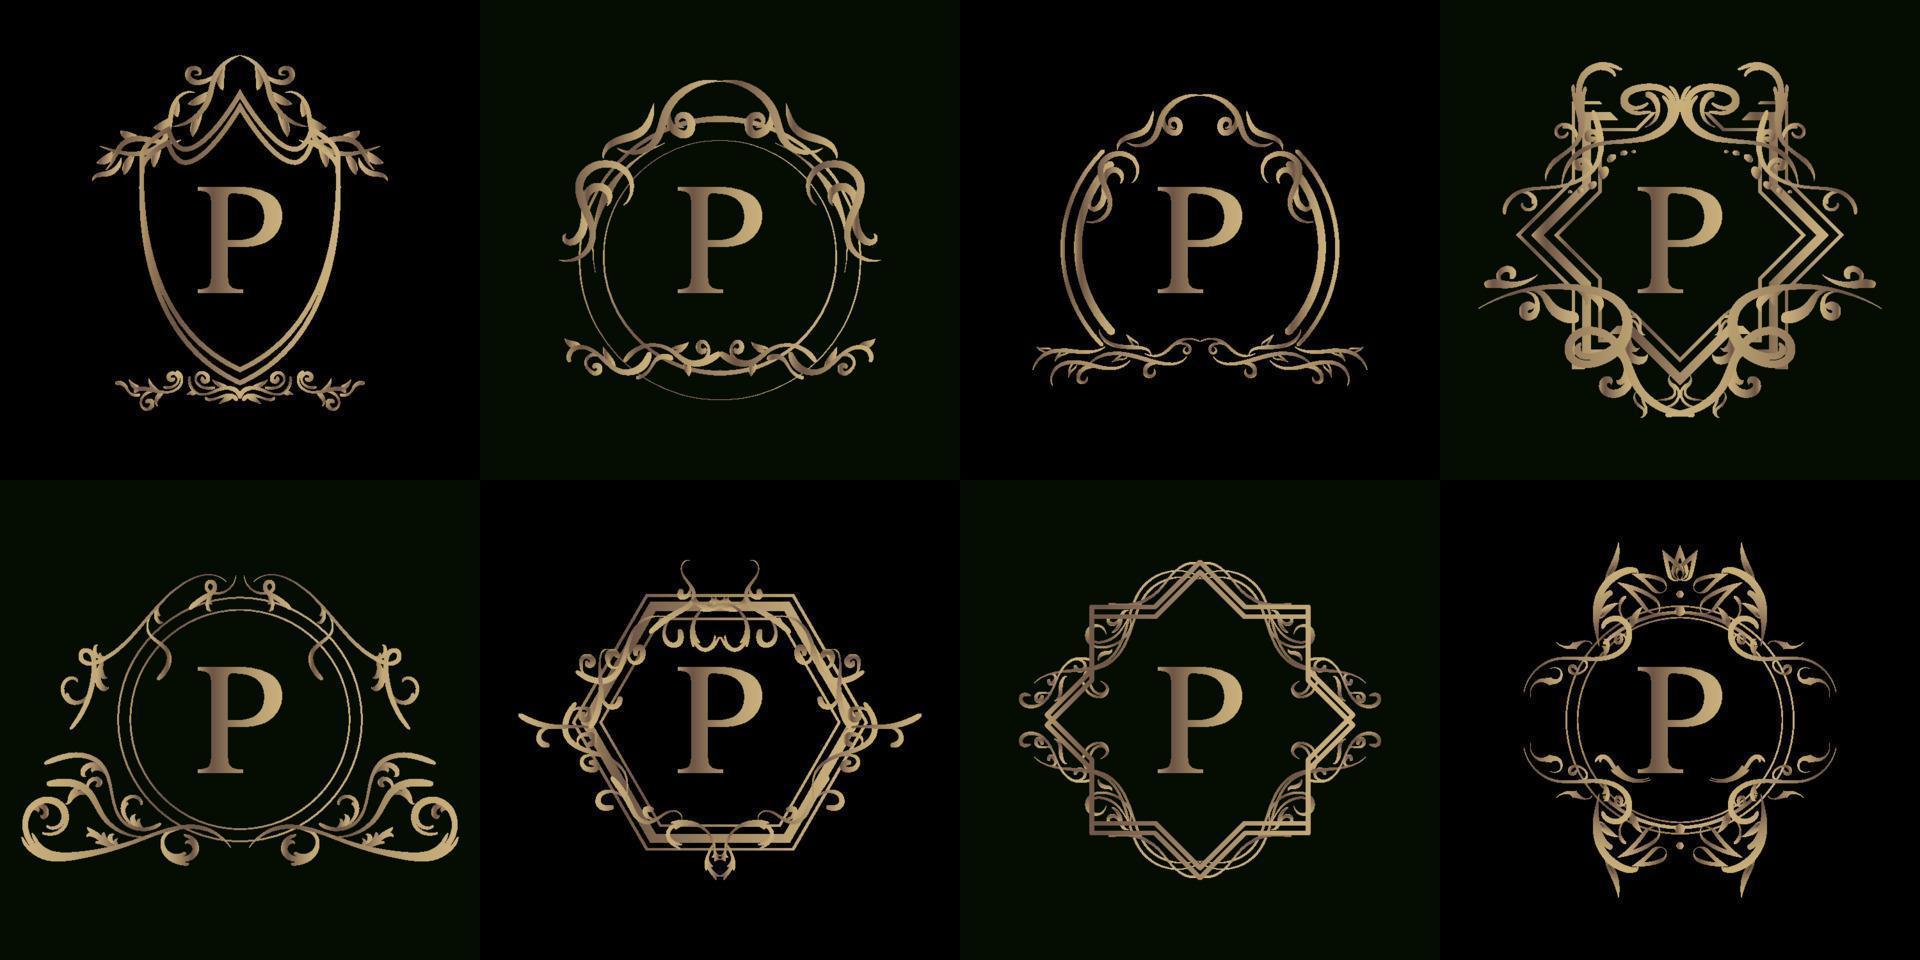 Collection of Logo initial P with luxury ornament or flower frame vector